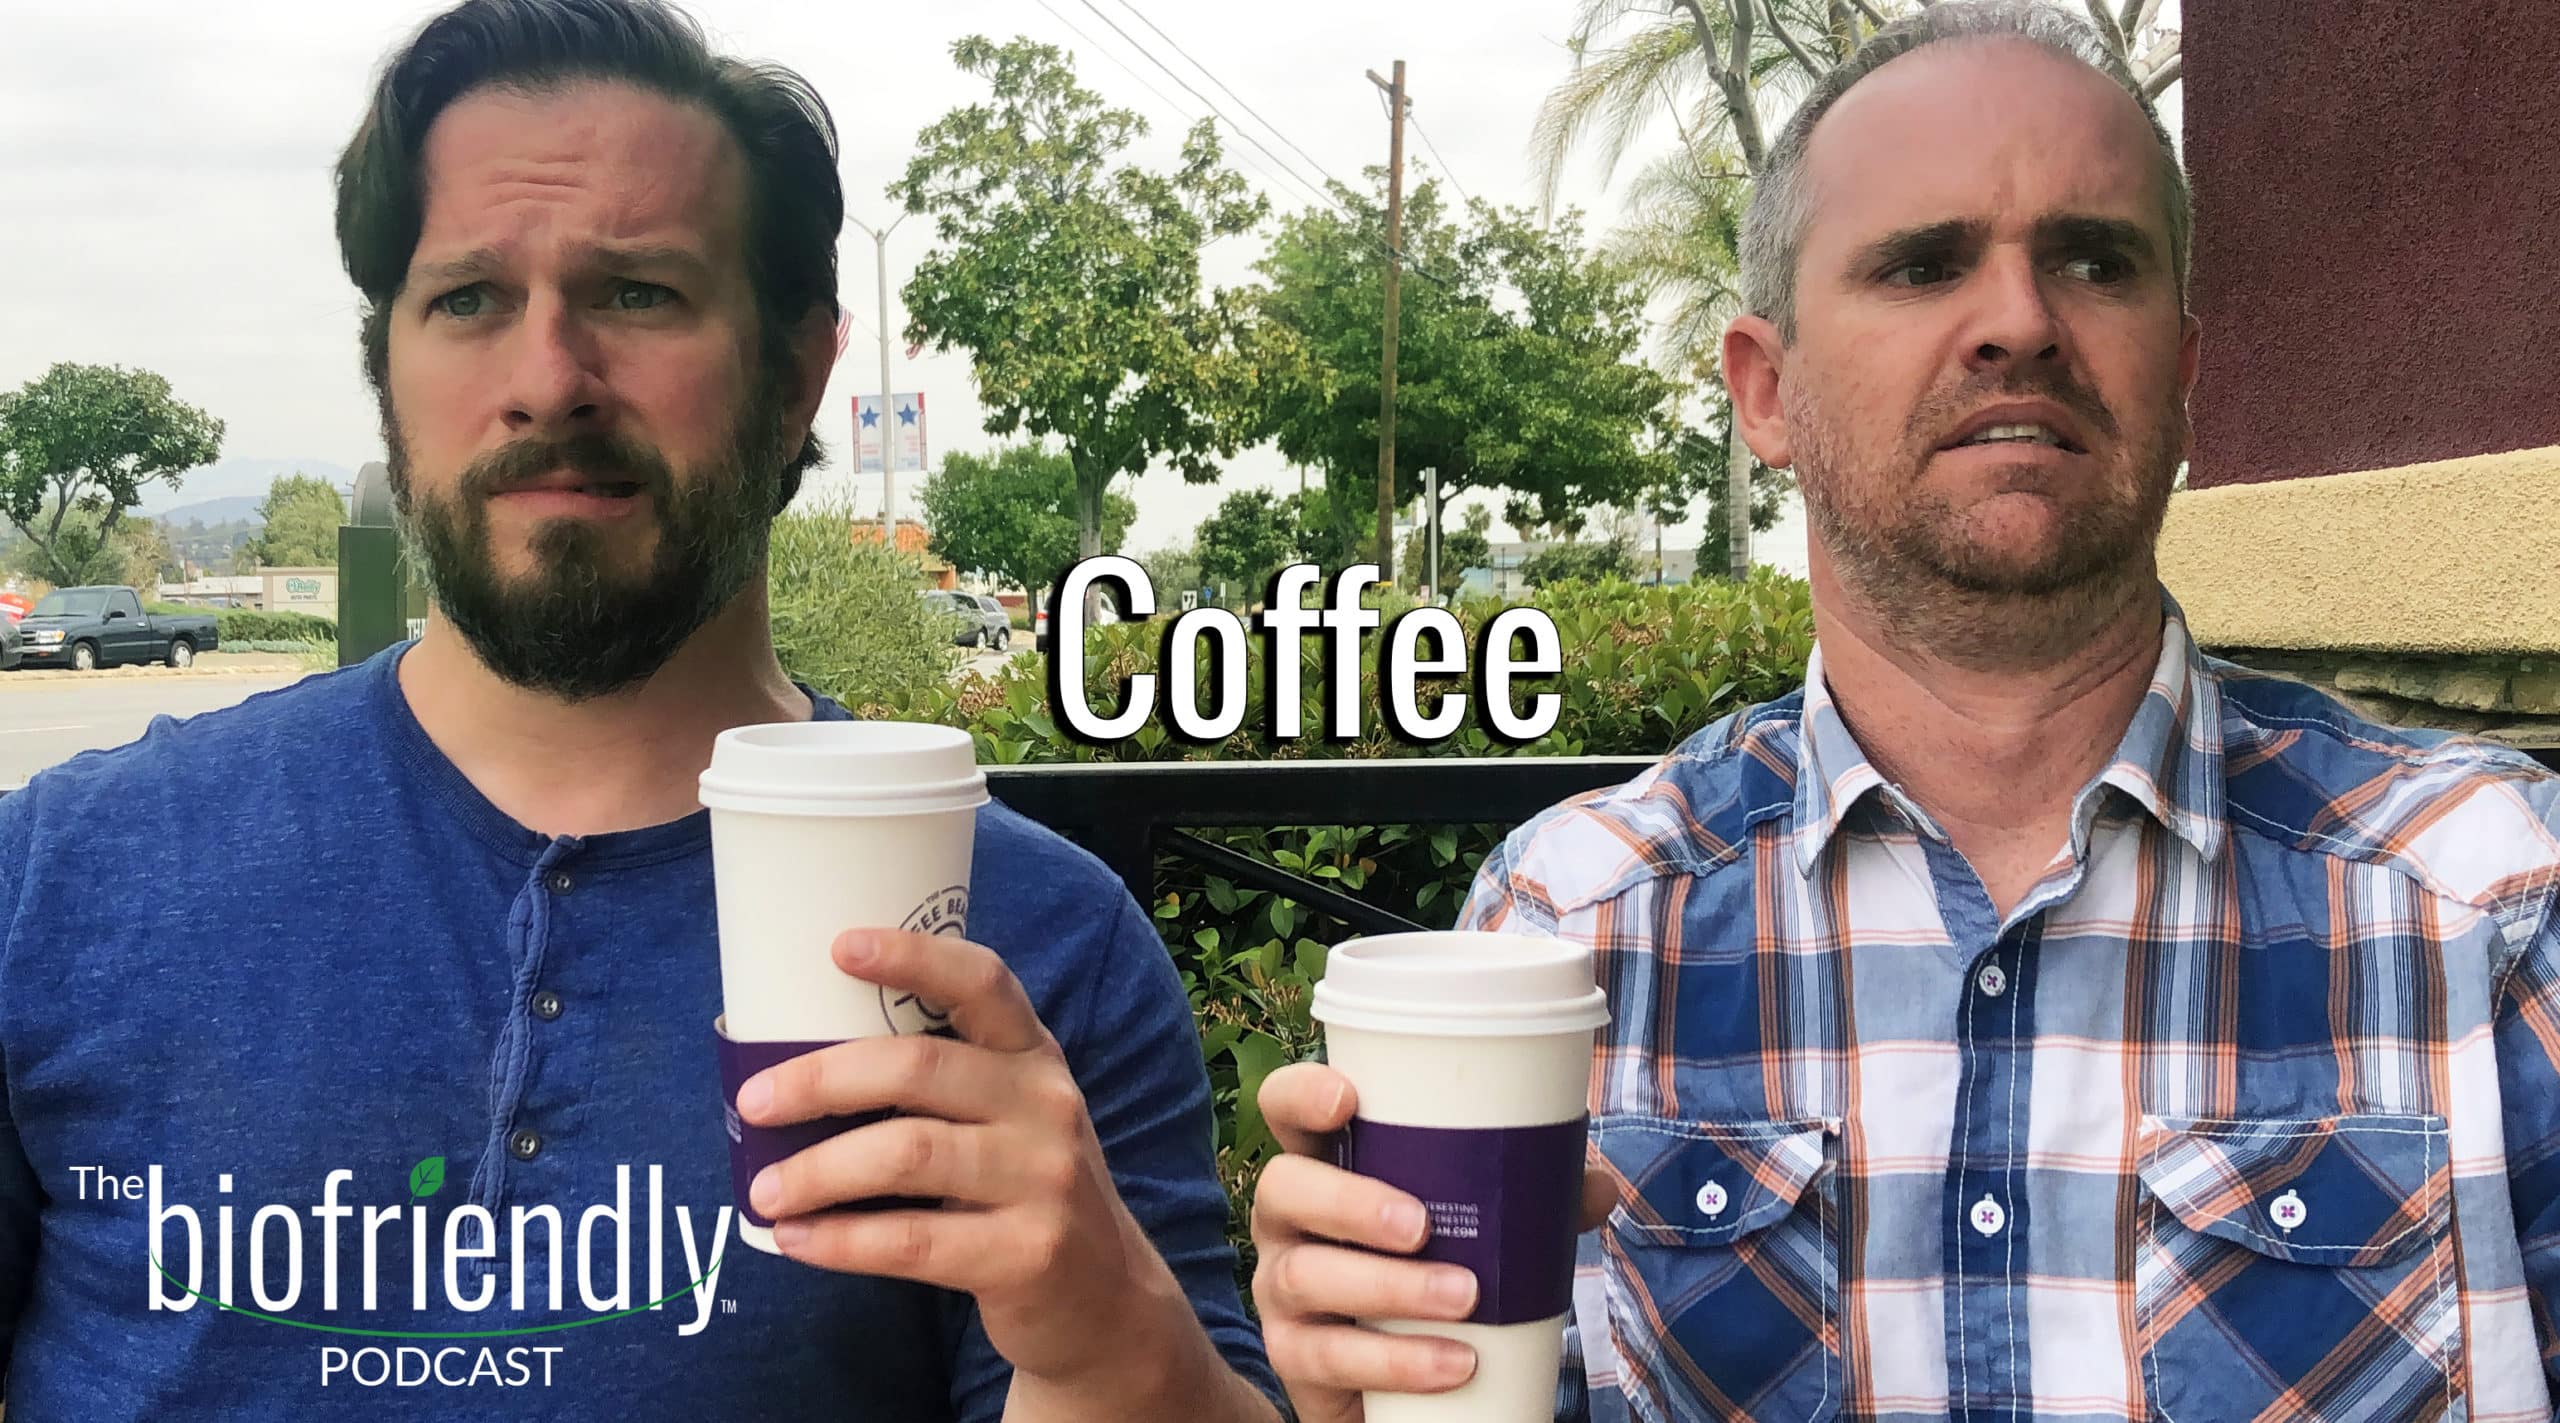 The Biofriendly Podcast - Episode 6 - Coffee